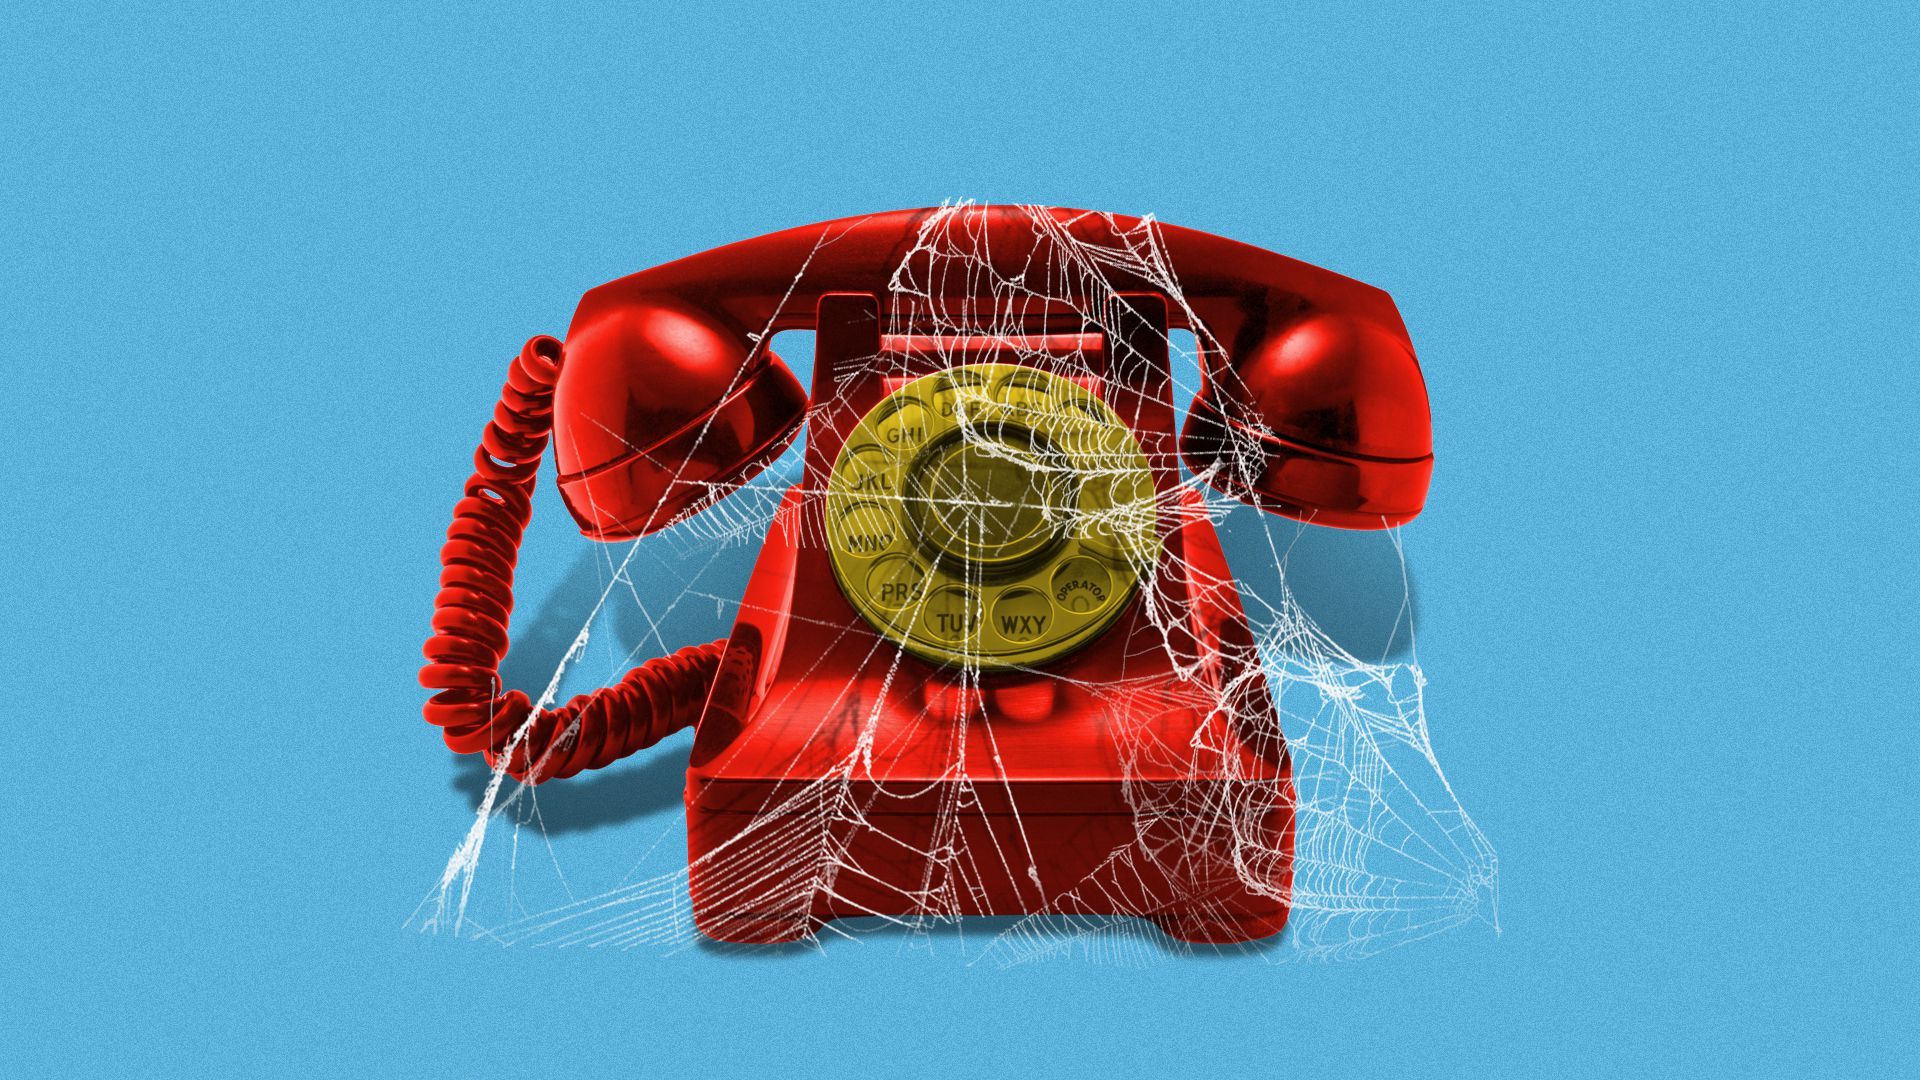 Illustration of an old rotary phone covered in cobwebs